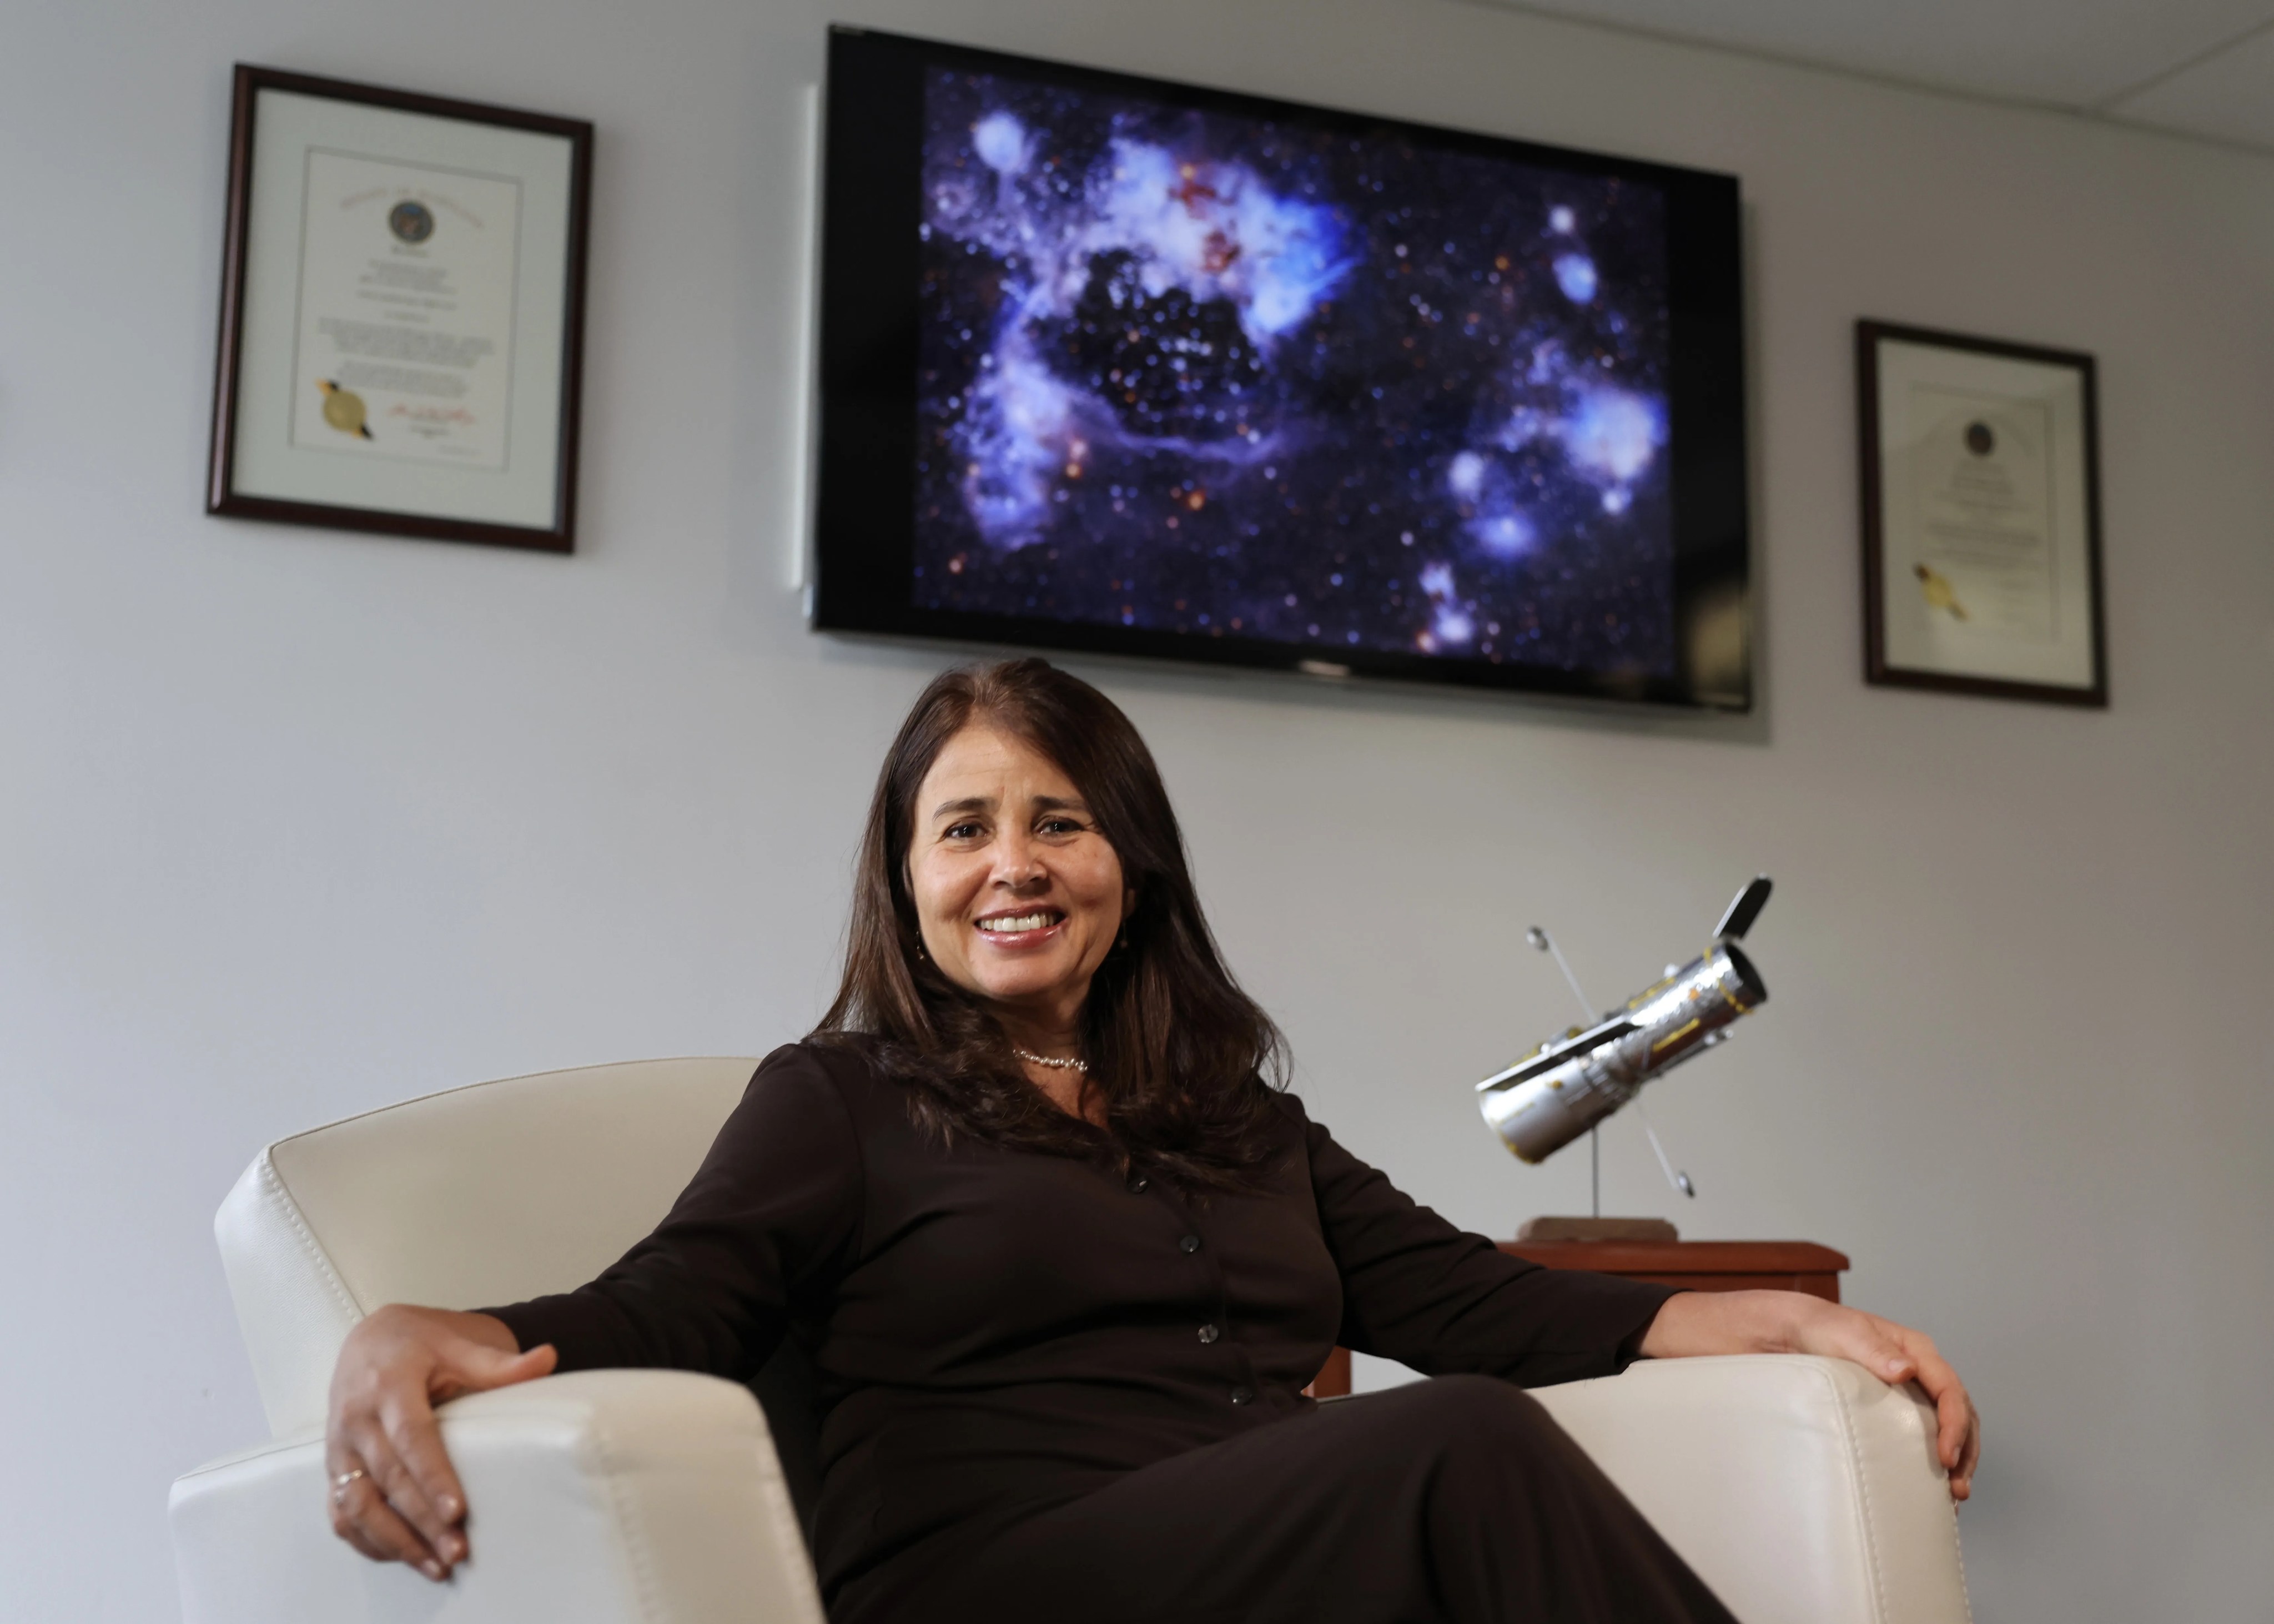 headshot of a woman wearing a dark brown sweater and brown hair sitting a white chair with a Hubble spacecraft model on the right